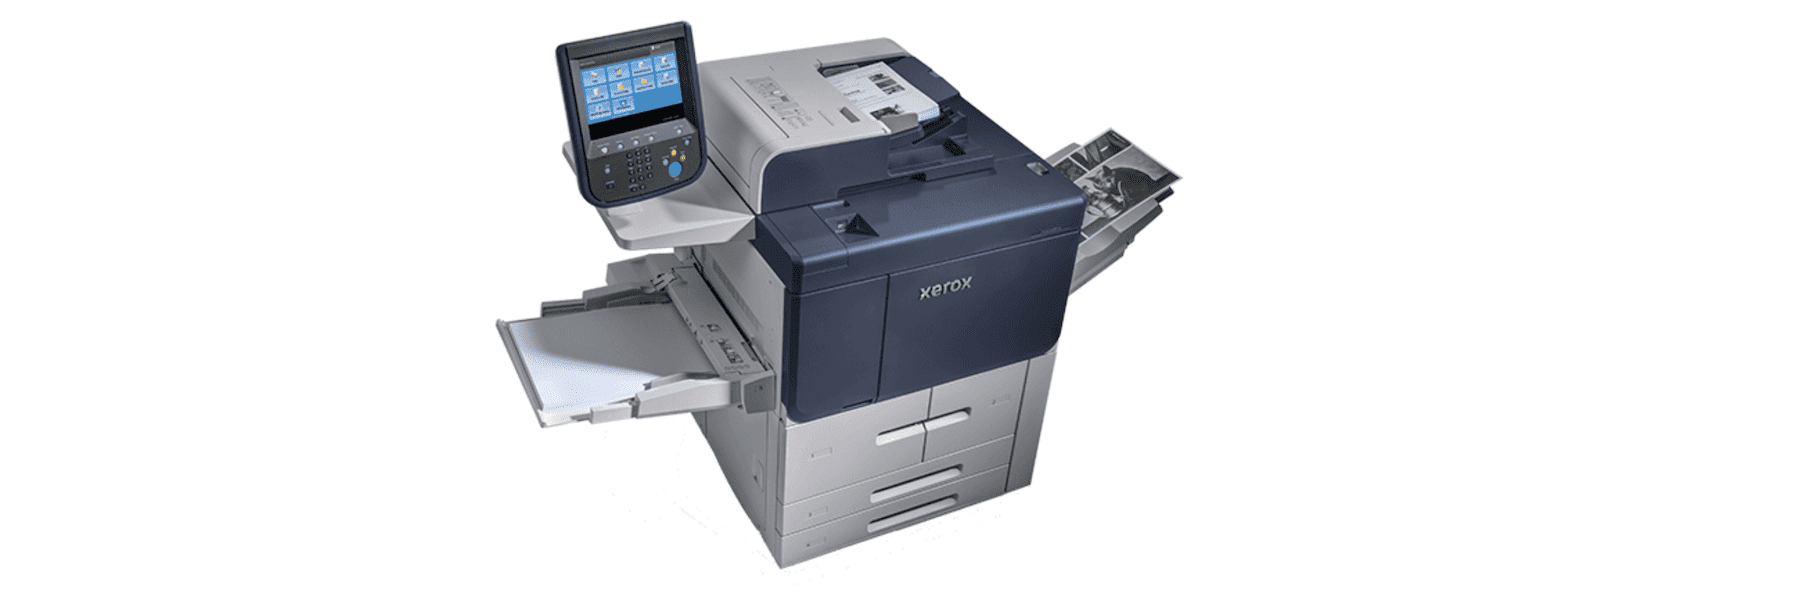 The base model of the Xerox PrimeLink B9100 production printer